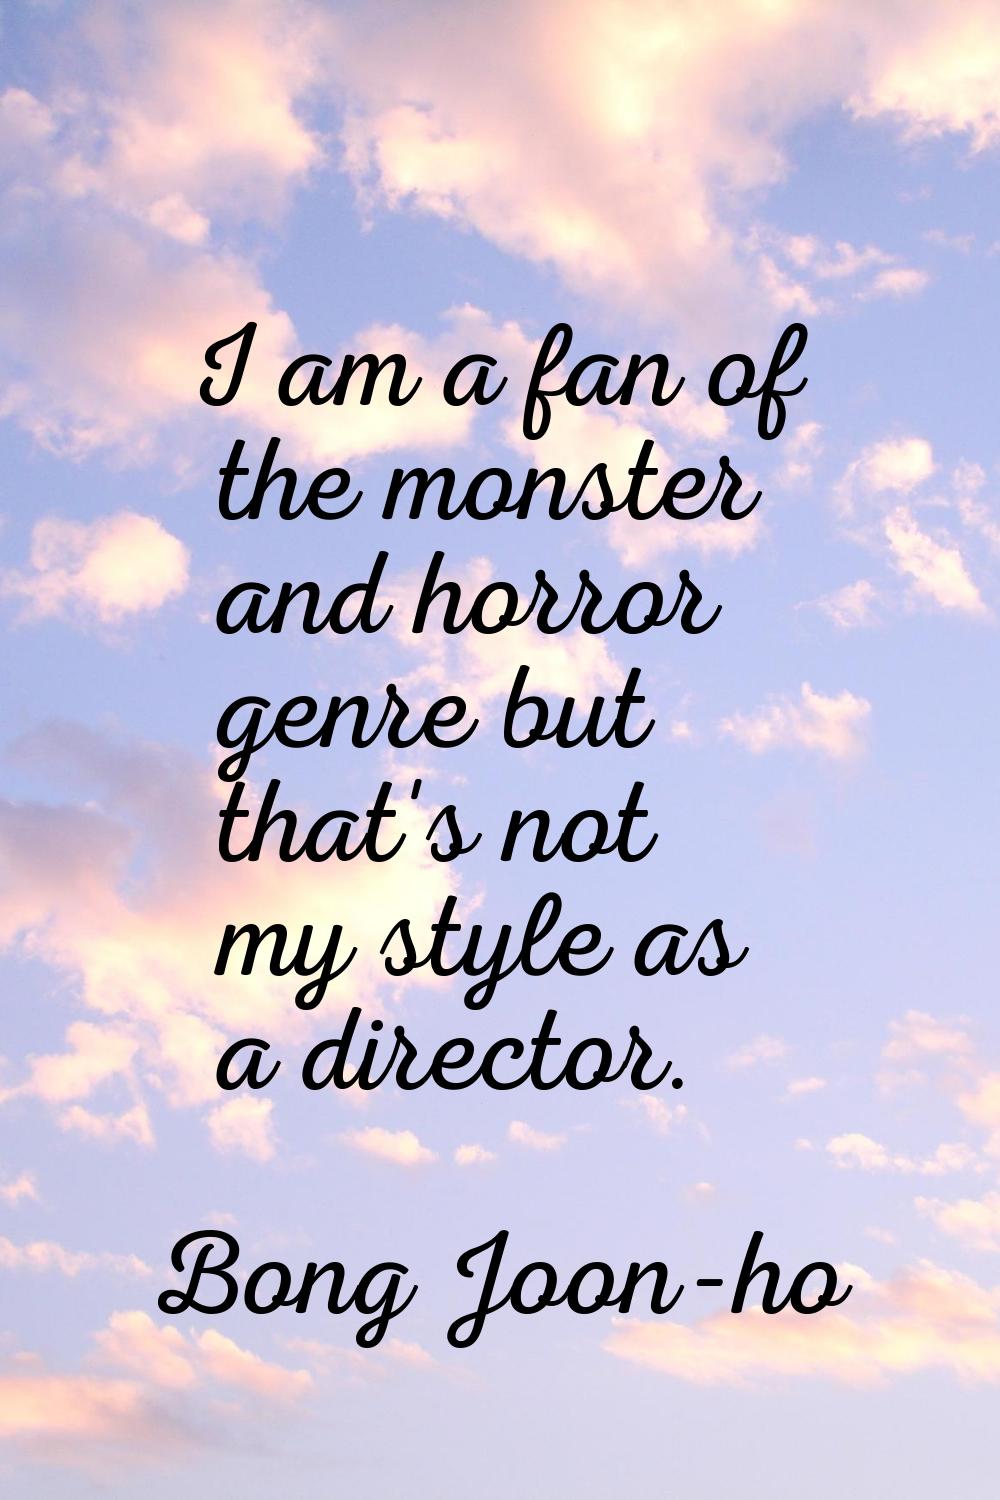 I am a fan of the monster and horror genre but that's not my style as a director.